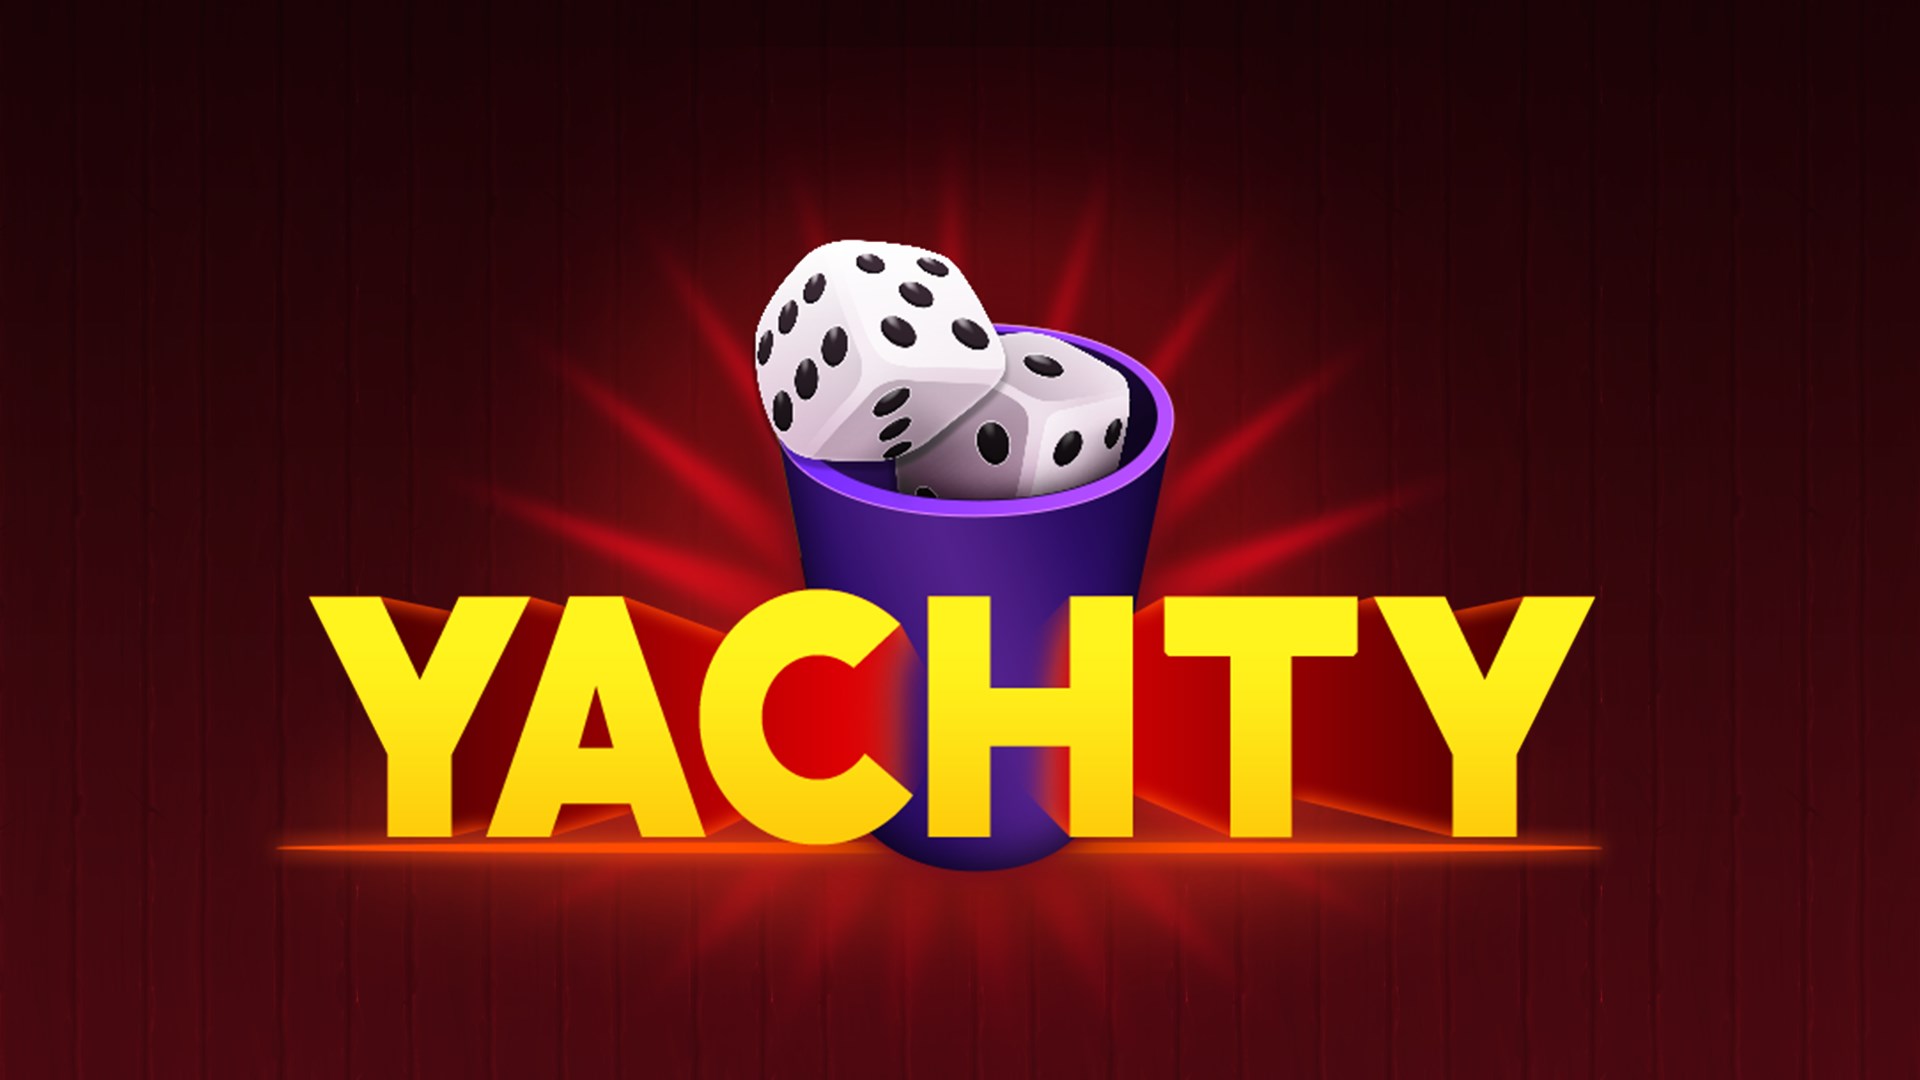 yachty games